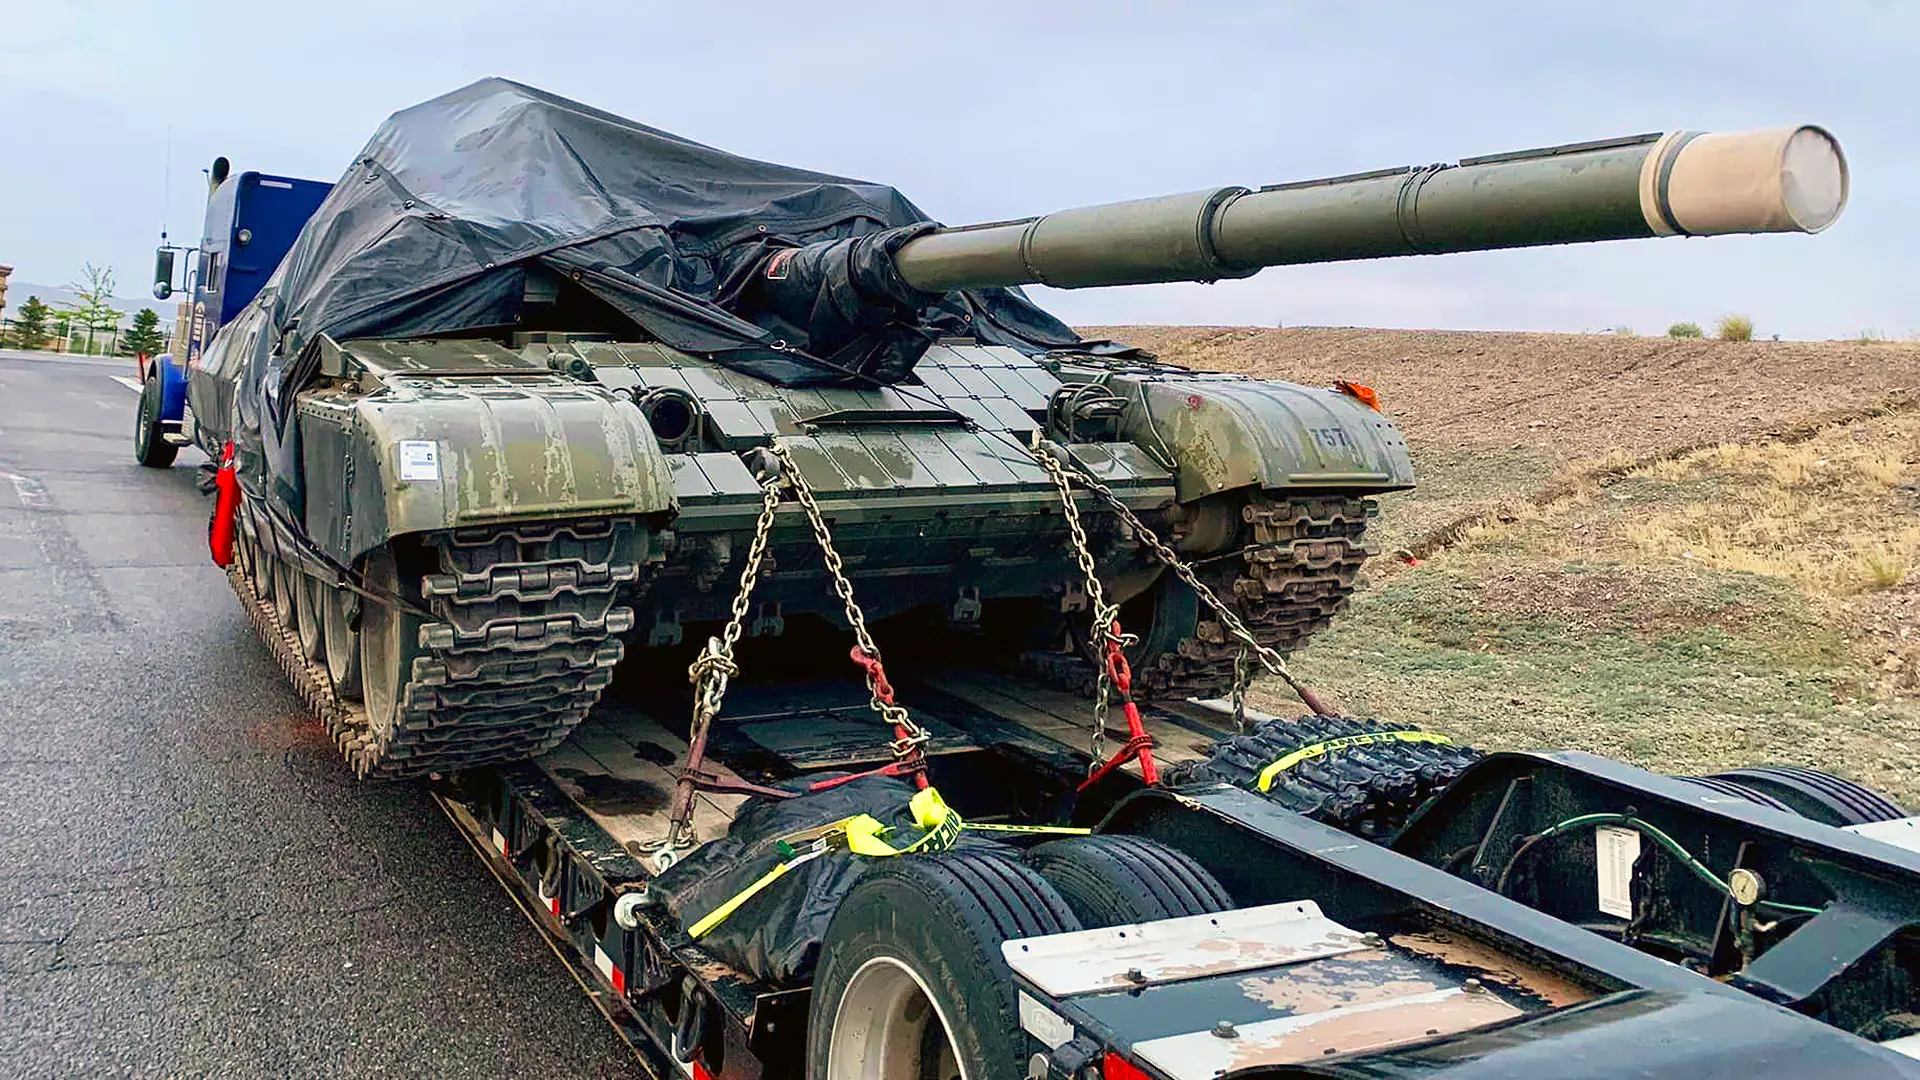 Following the T-90A, the Russian T-72 tank is in the US - the fighting vehicle is being transported to Aberdeen Proving Ground